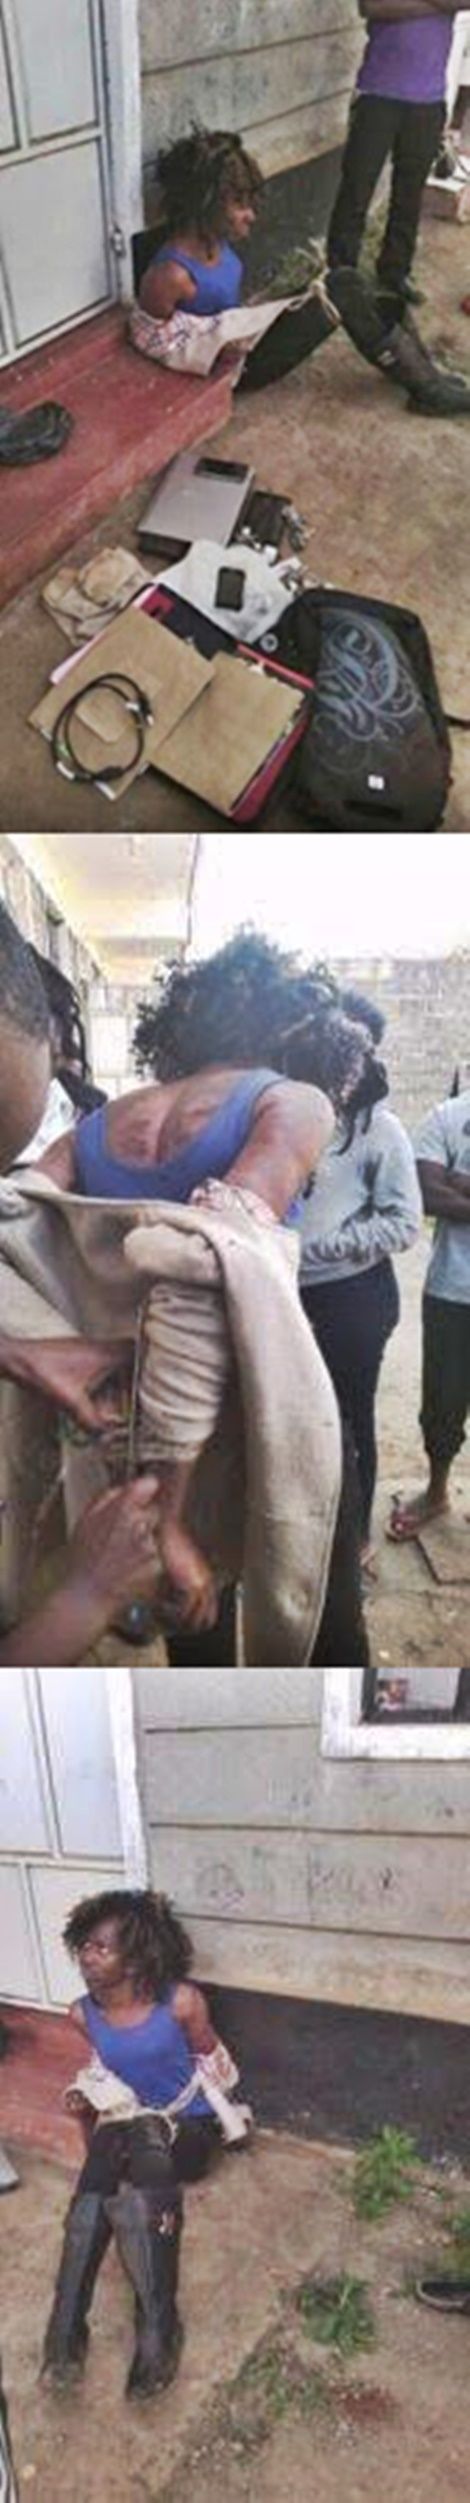 Prostitute Caught Stealing From Client - a KU Student!